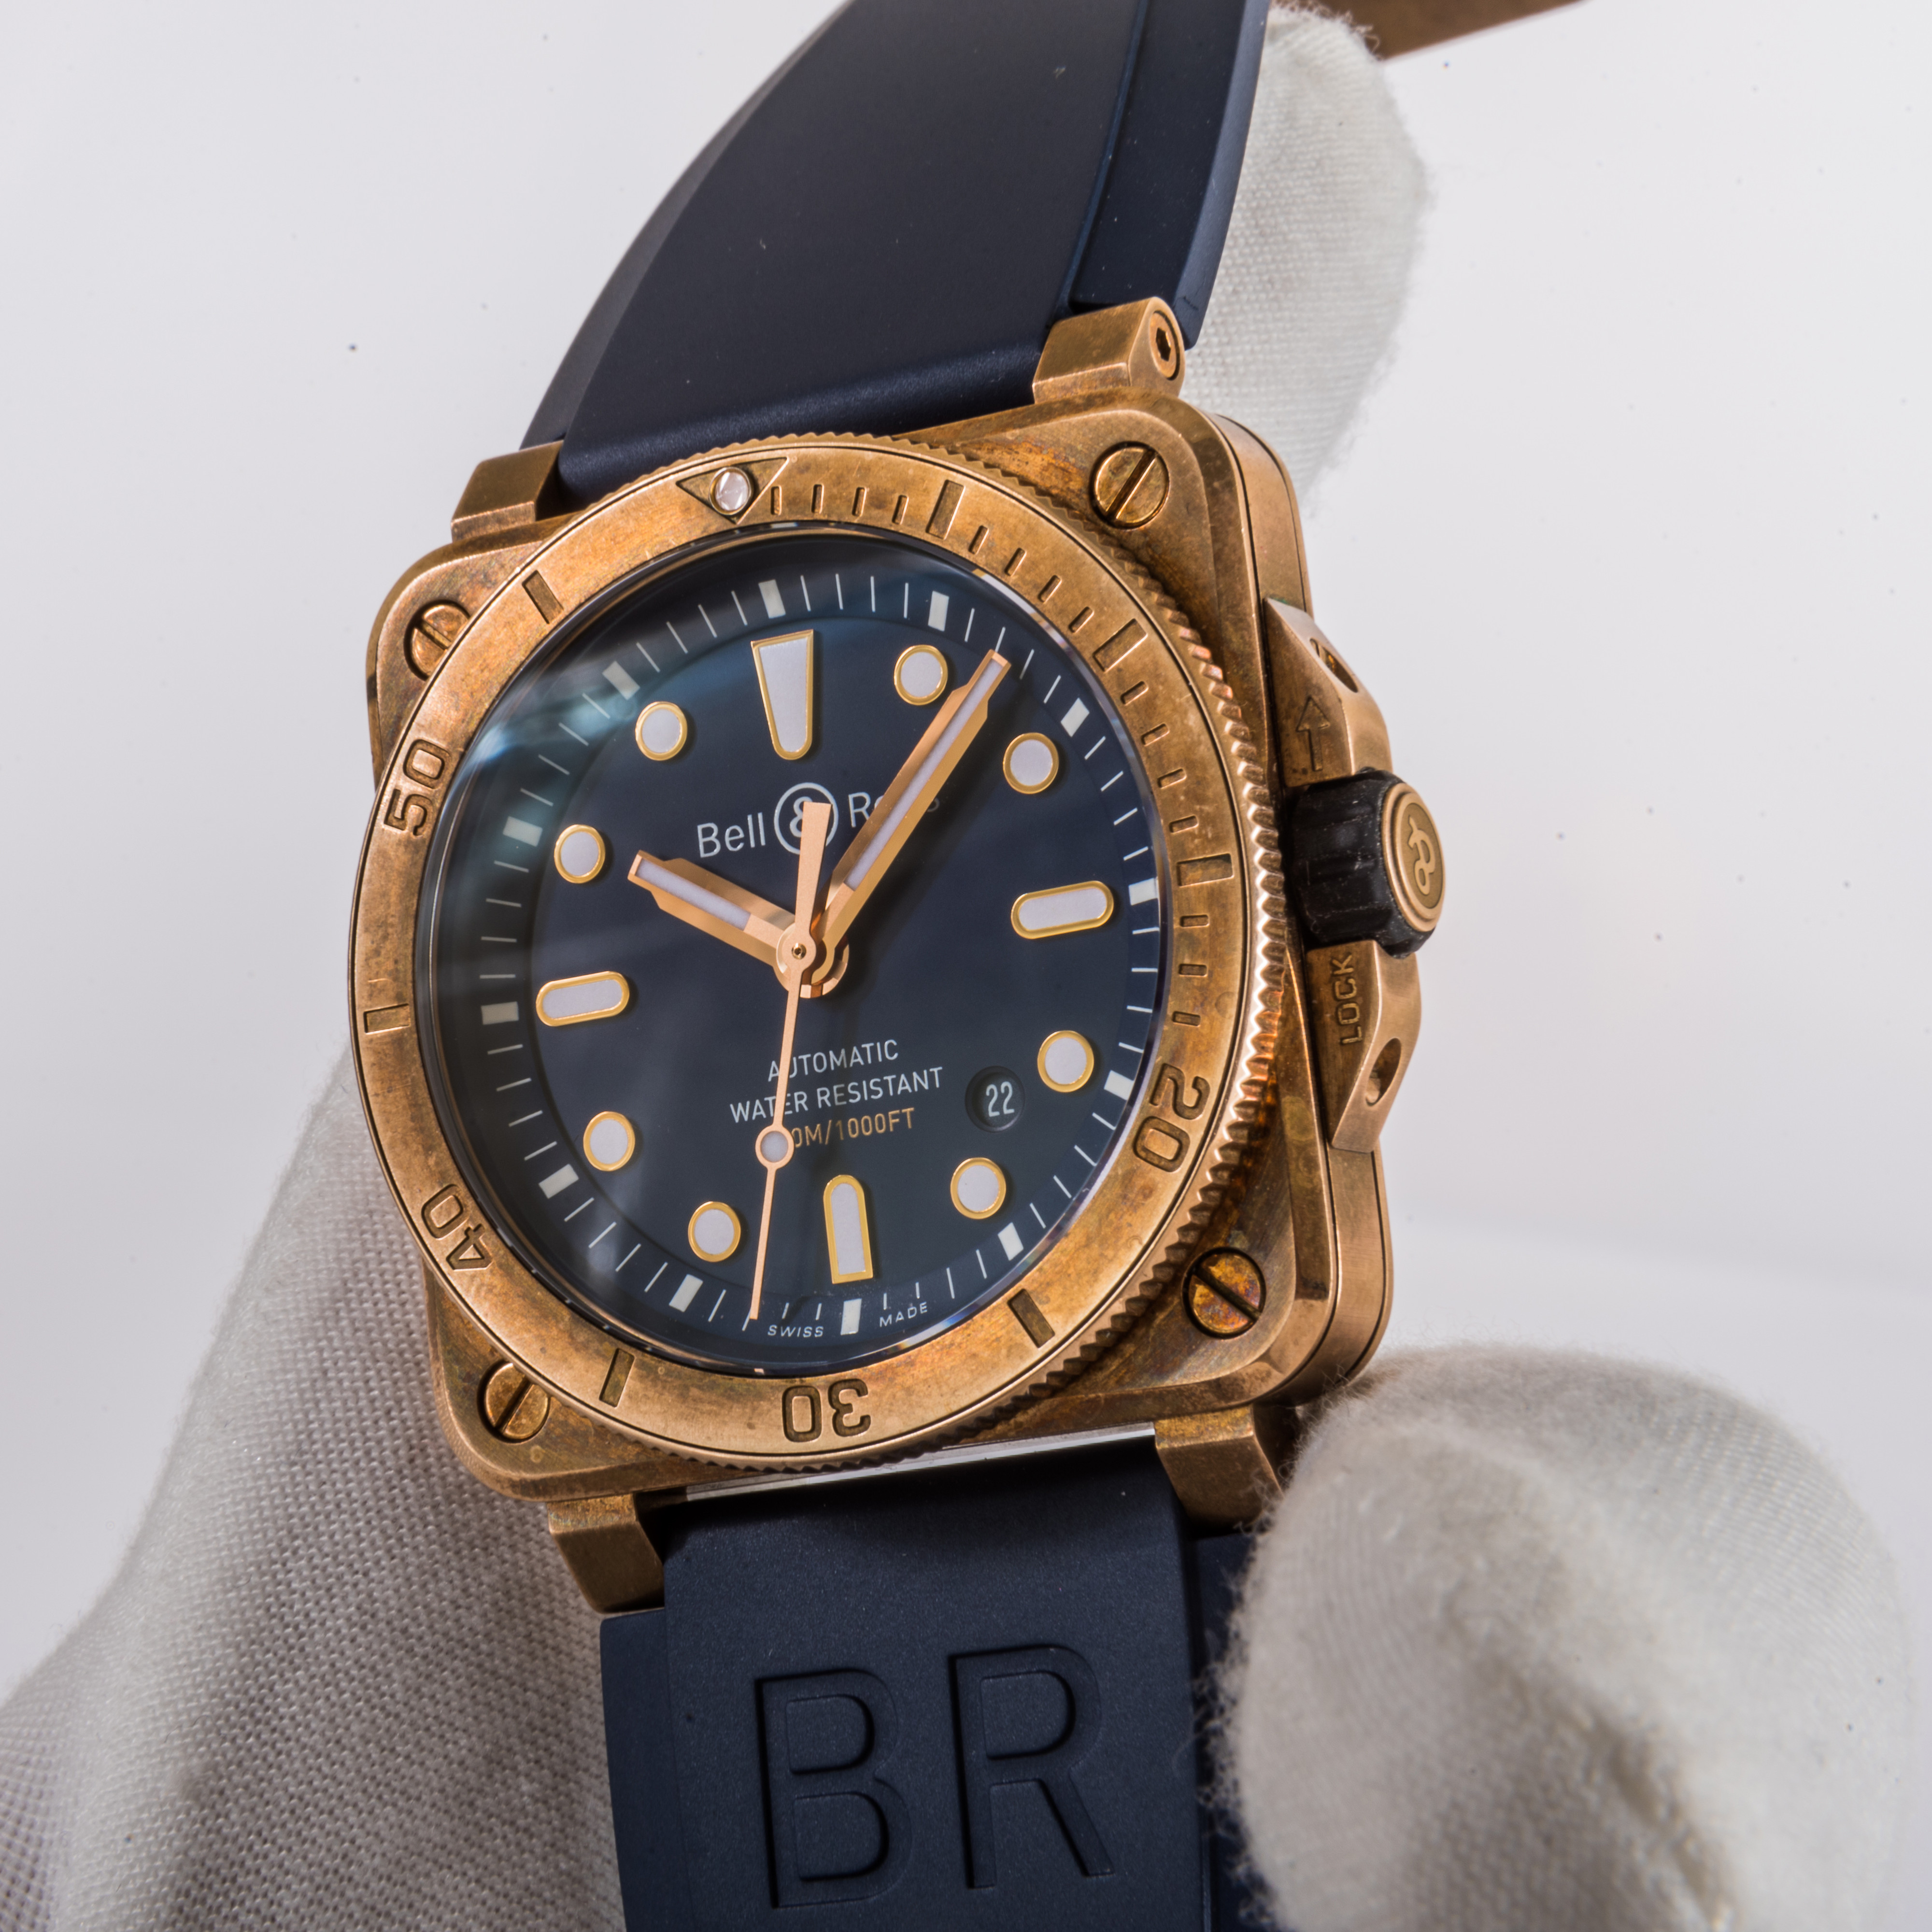 Bell & 03-92 Bronze Navy Blue *Limited Edition* - DelrayWatch.com